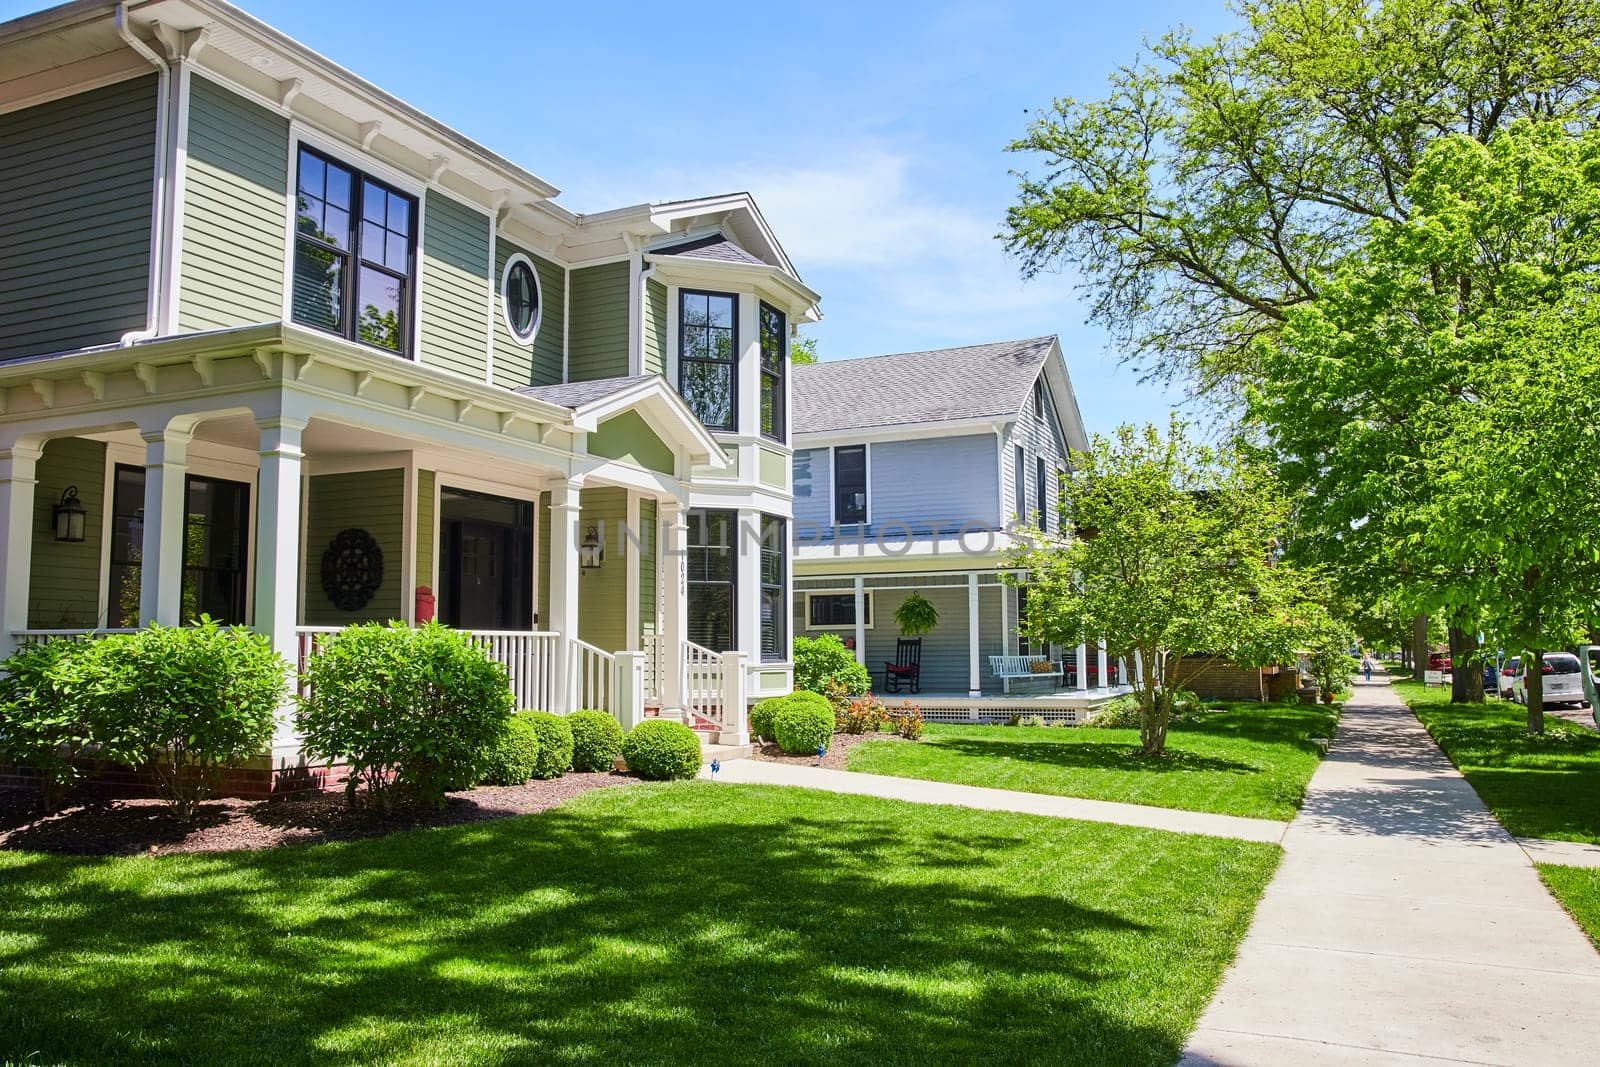 Elegant suburban homes in Fort Wayne, Indiana, showcasing lush lawns and cozy porches under a clear blue sky.